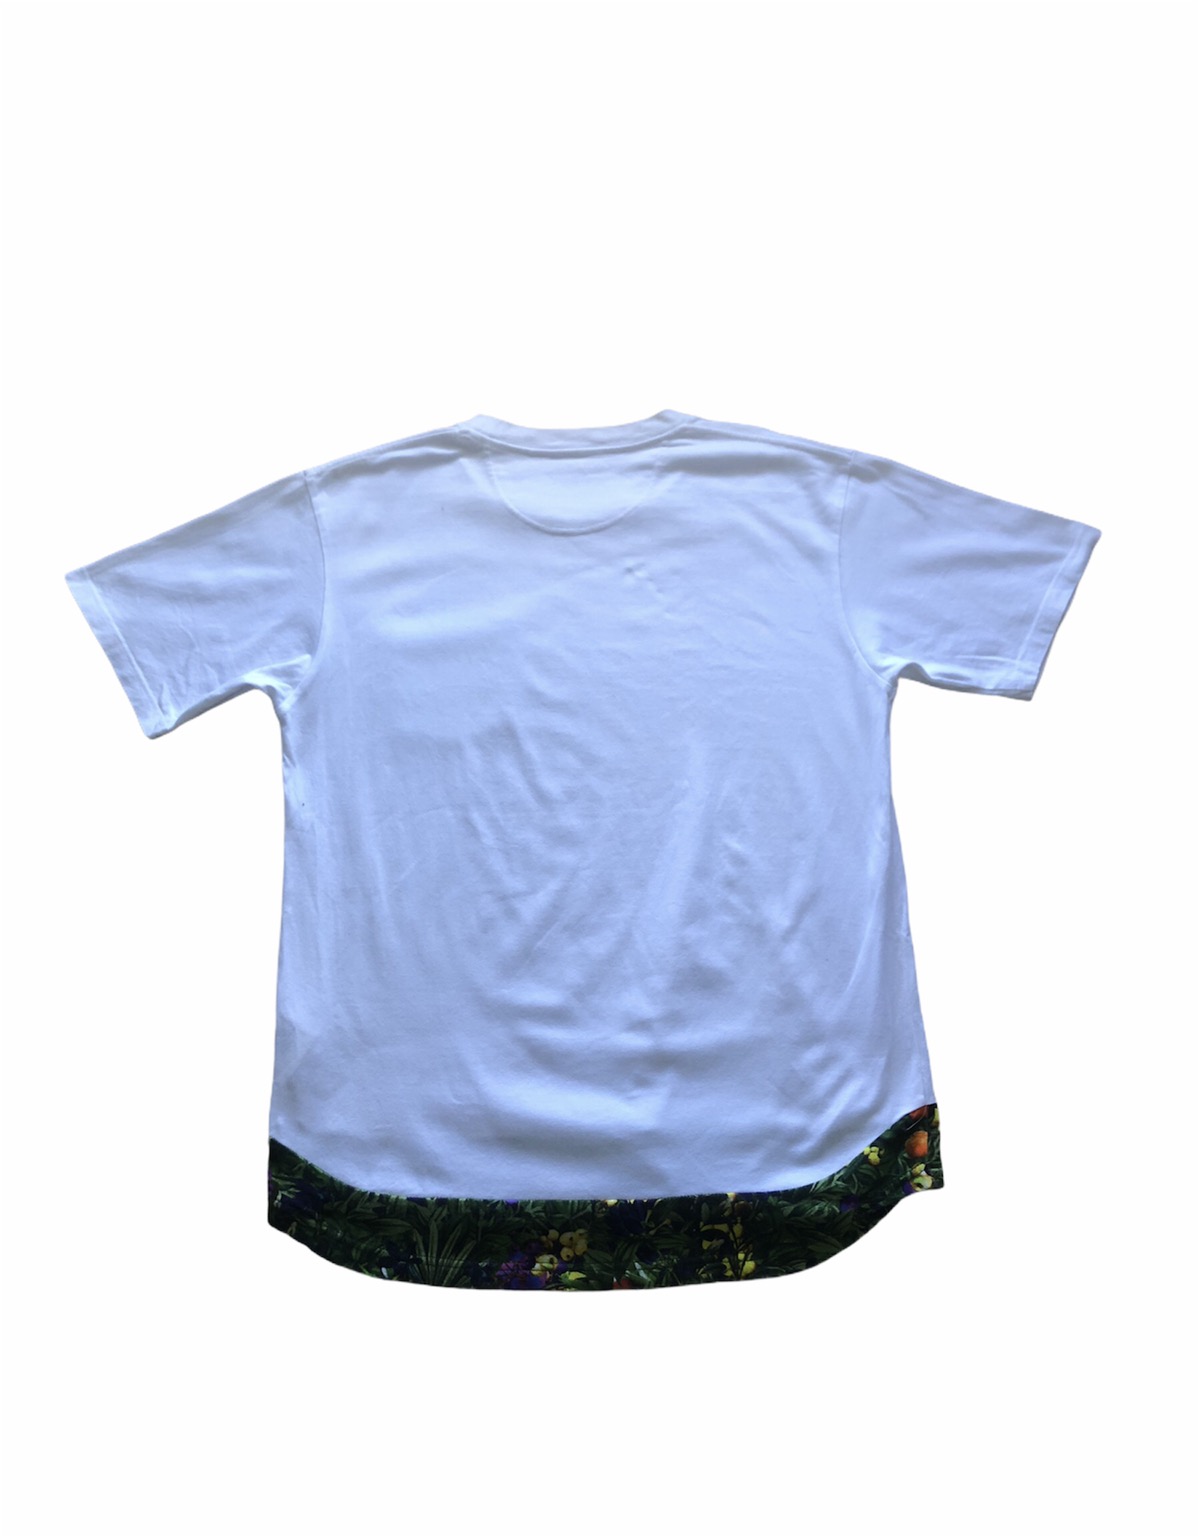 Attached Fabric Floral motif Pocket t shirt - 5